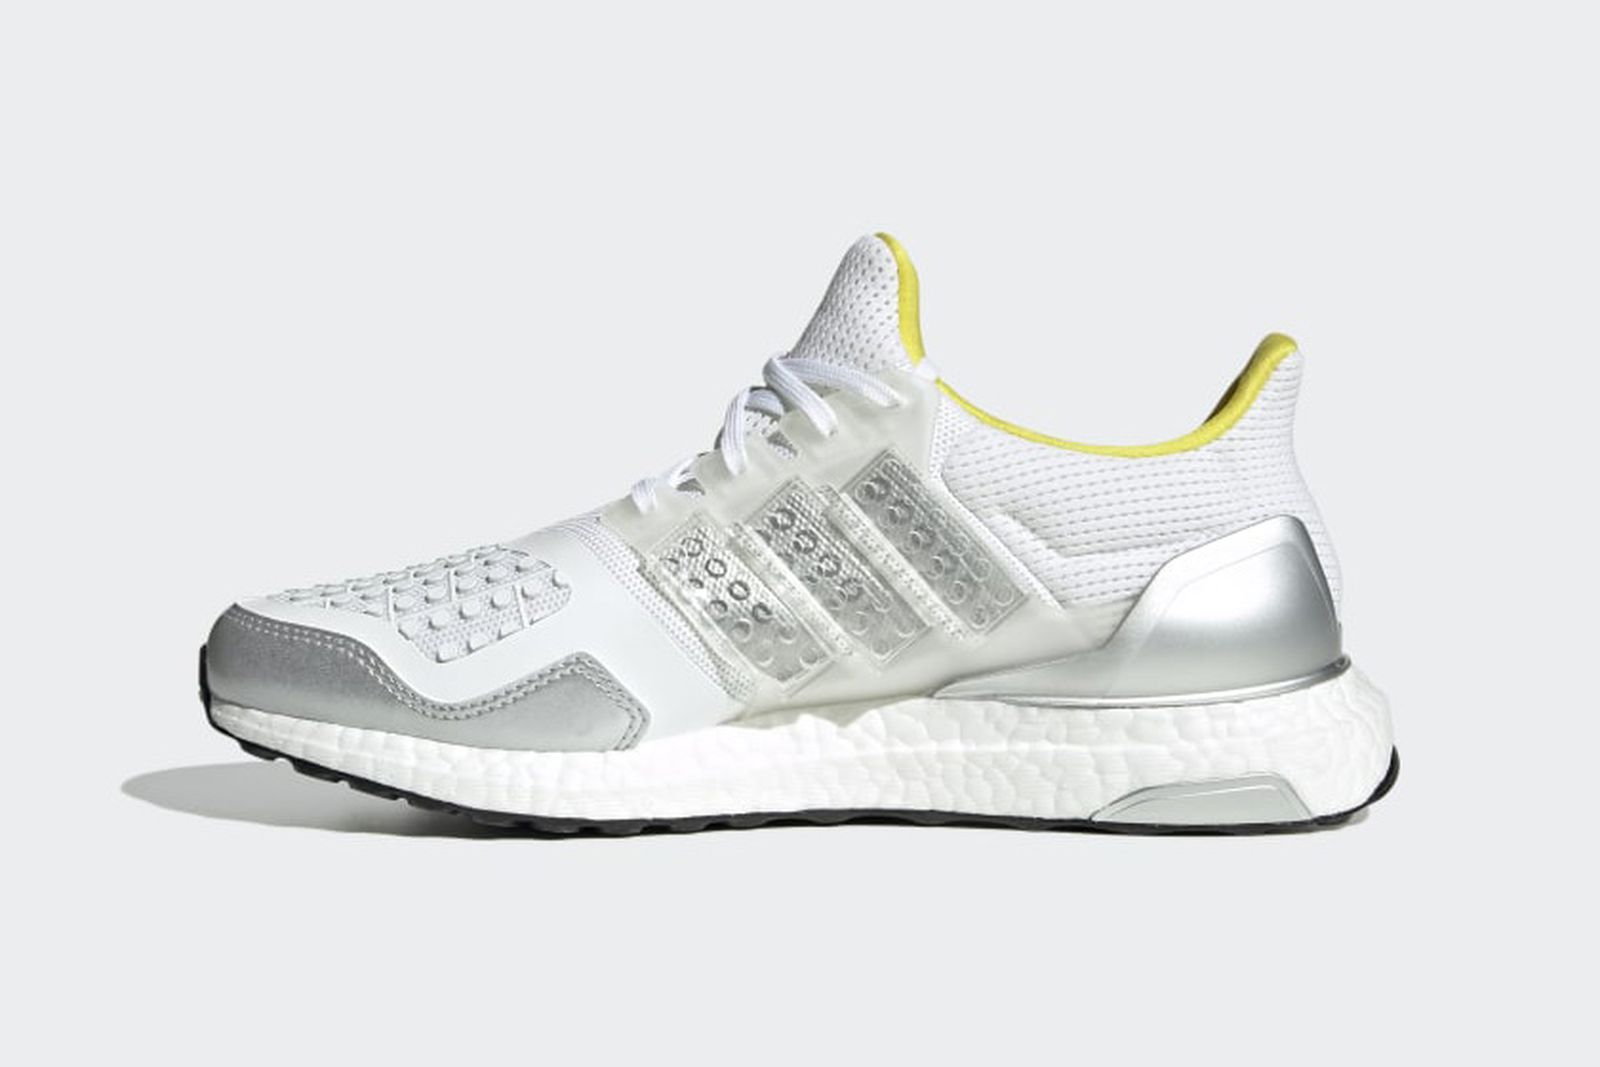 lego-adidas-ultraboost-dna-release-date-price-07